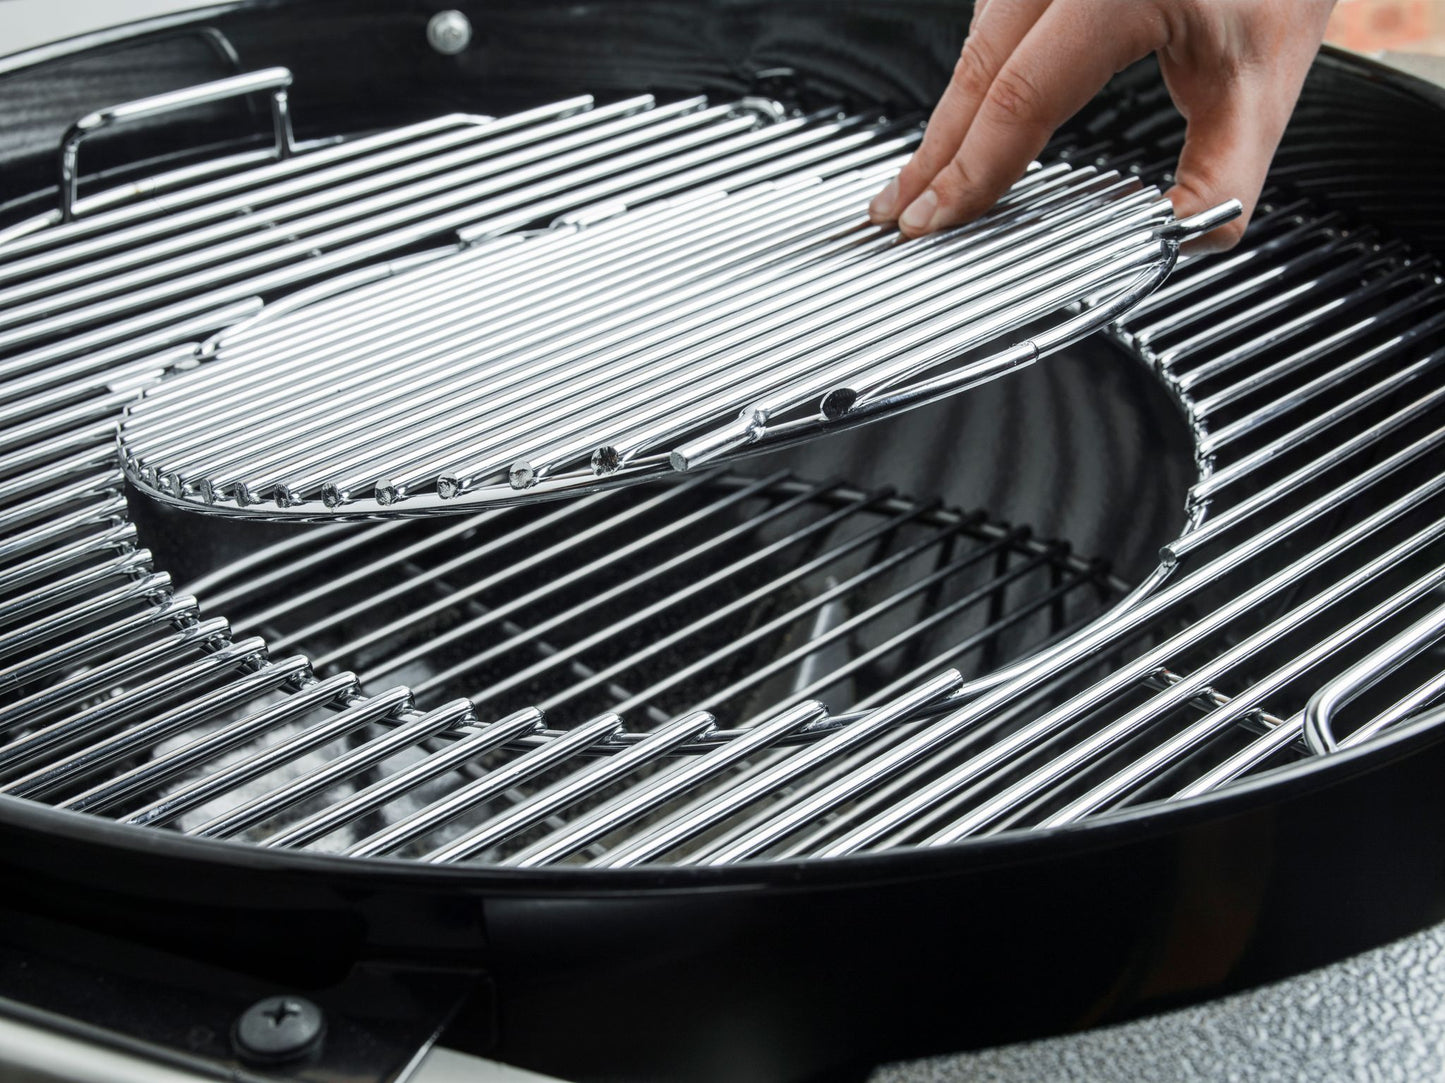 Weber Performer Charcoal BBQ 57cm with Stainless Grill